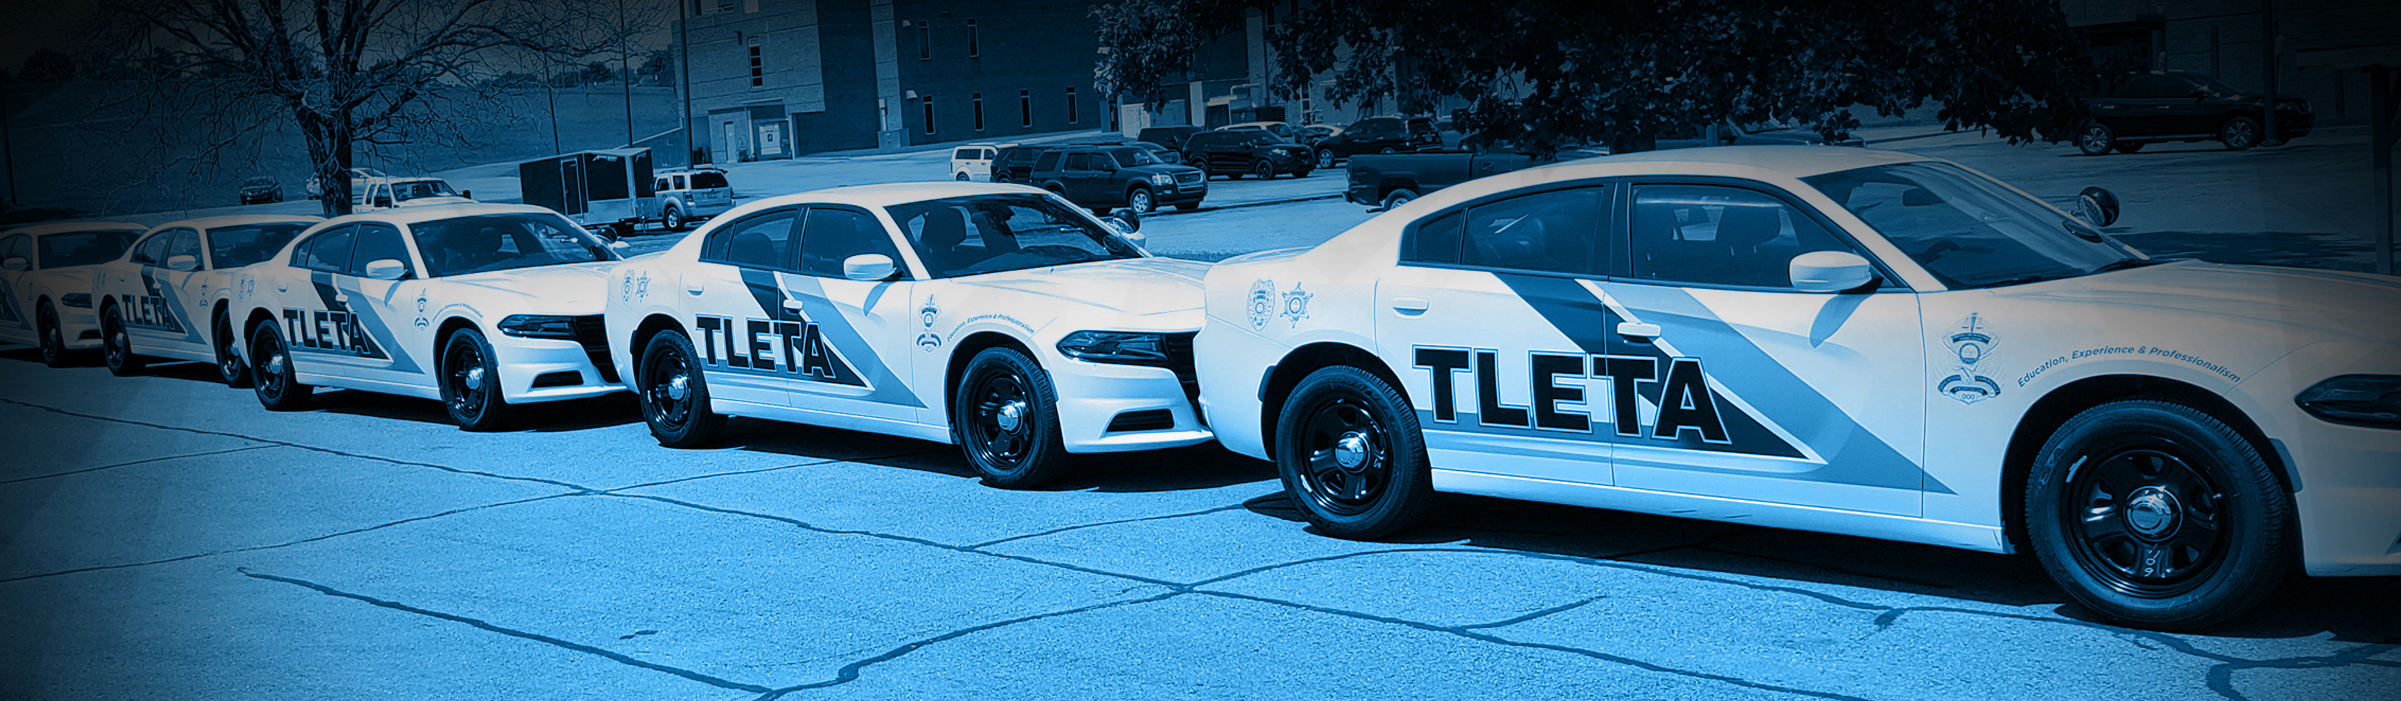 Police Car Fleet with New Graphics